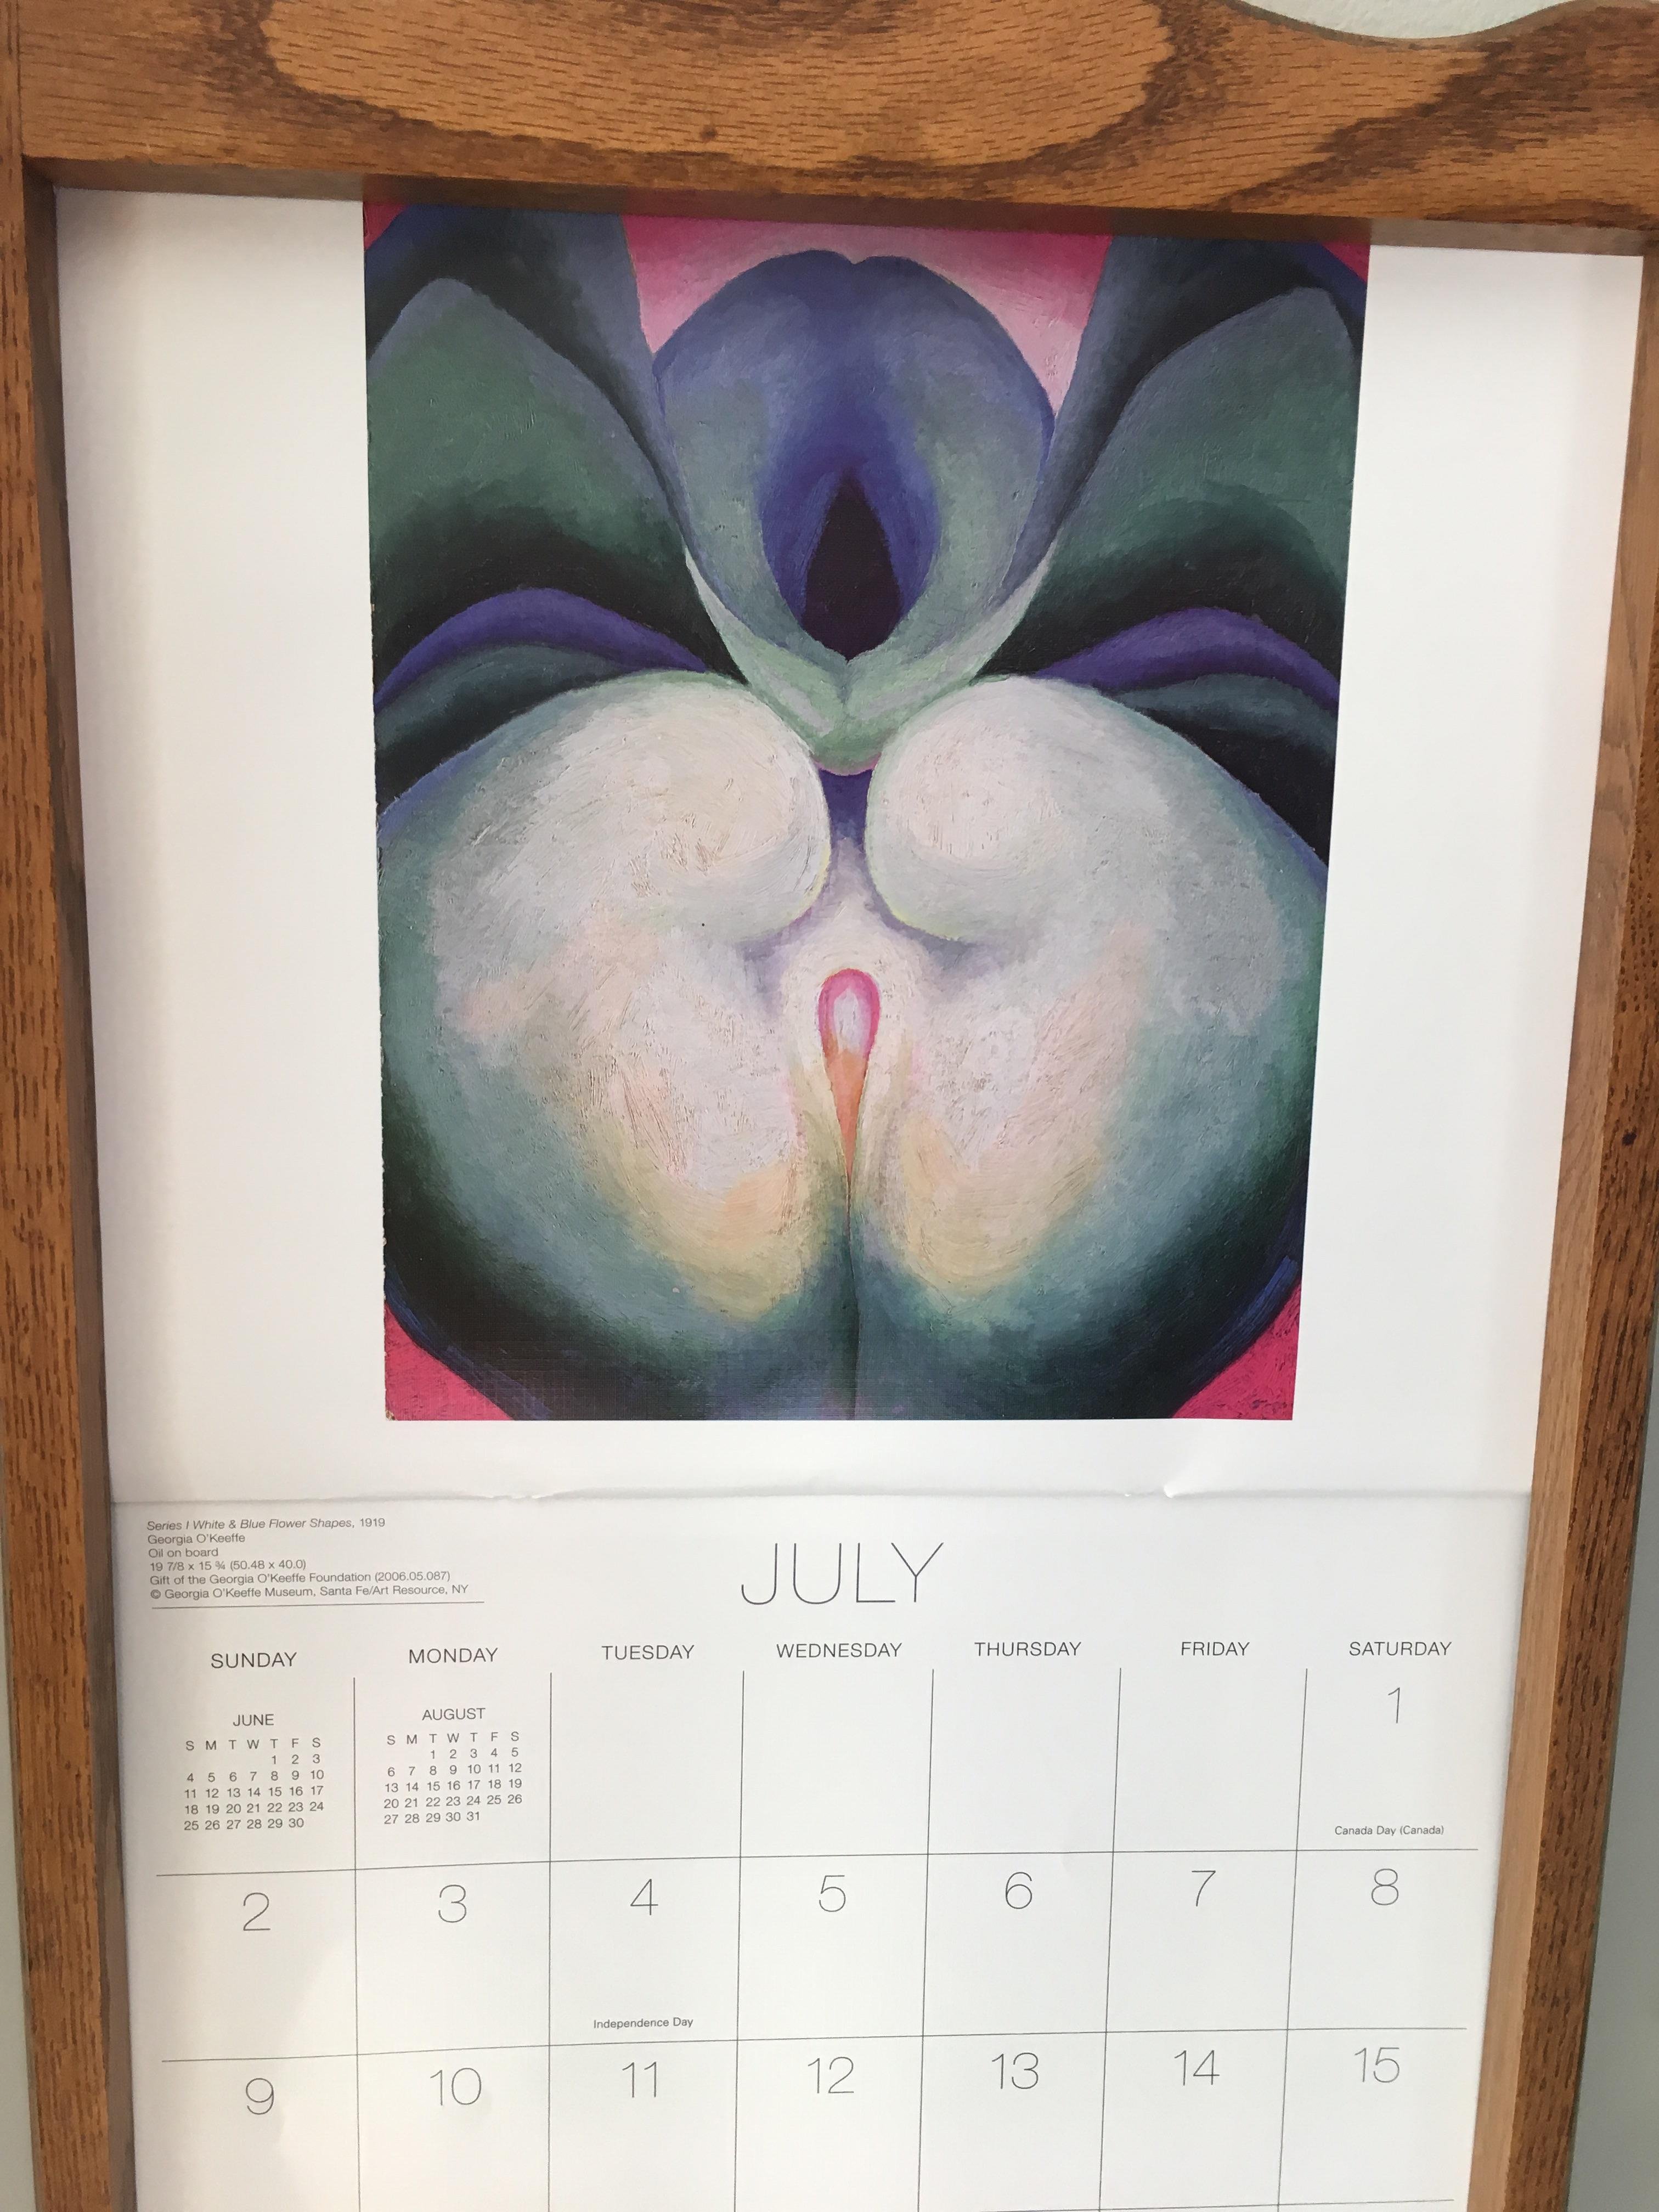 This calender picture